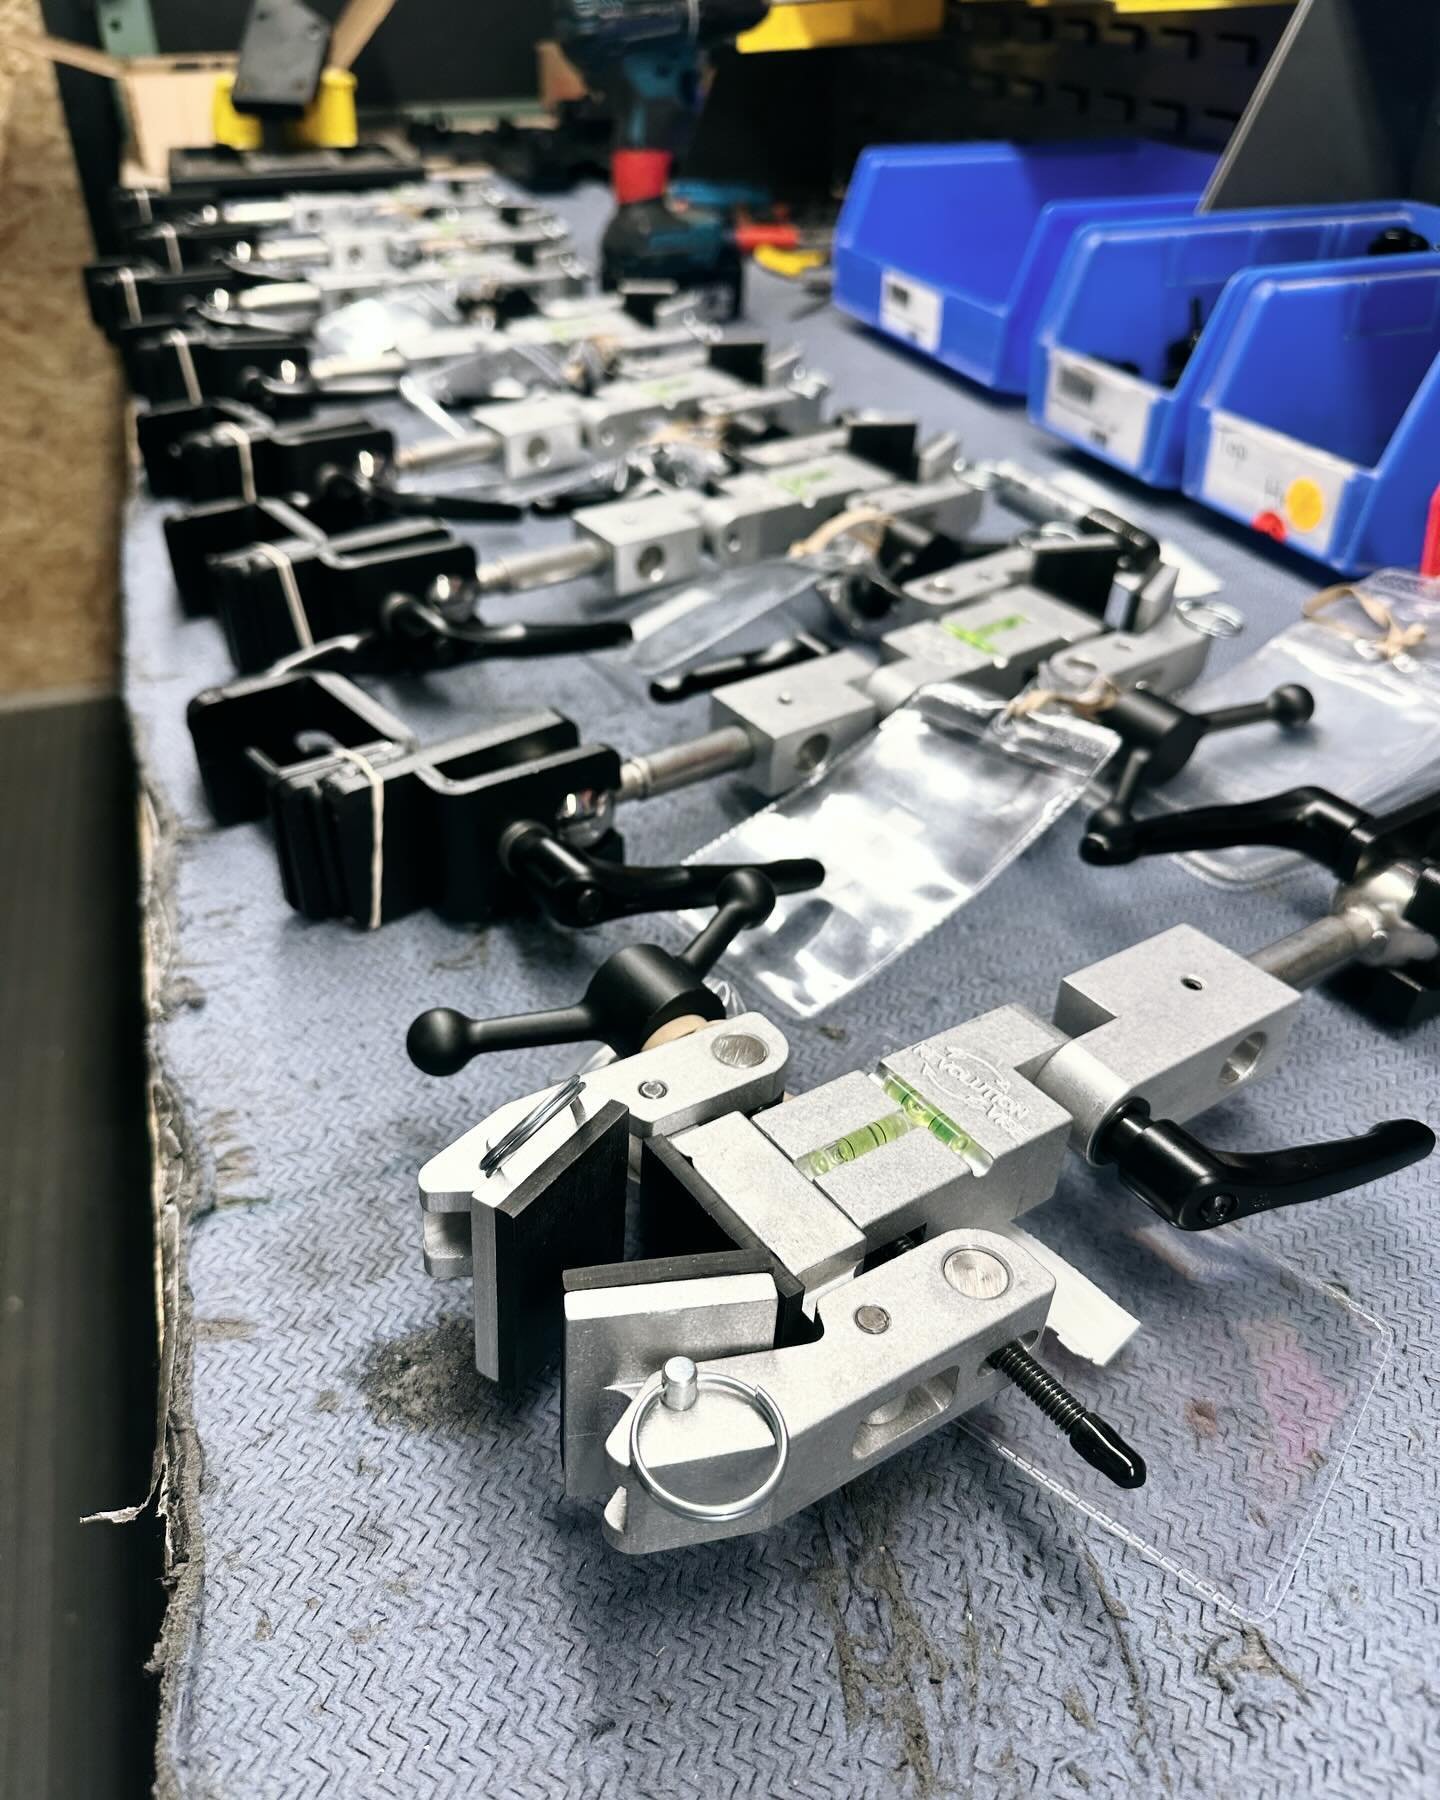 Your bow vise headquarters! The Revolution and EZ Green Vises are piling out the door daily. Check them out through our website! 

#lastchancearchery